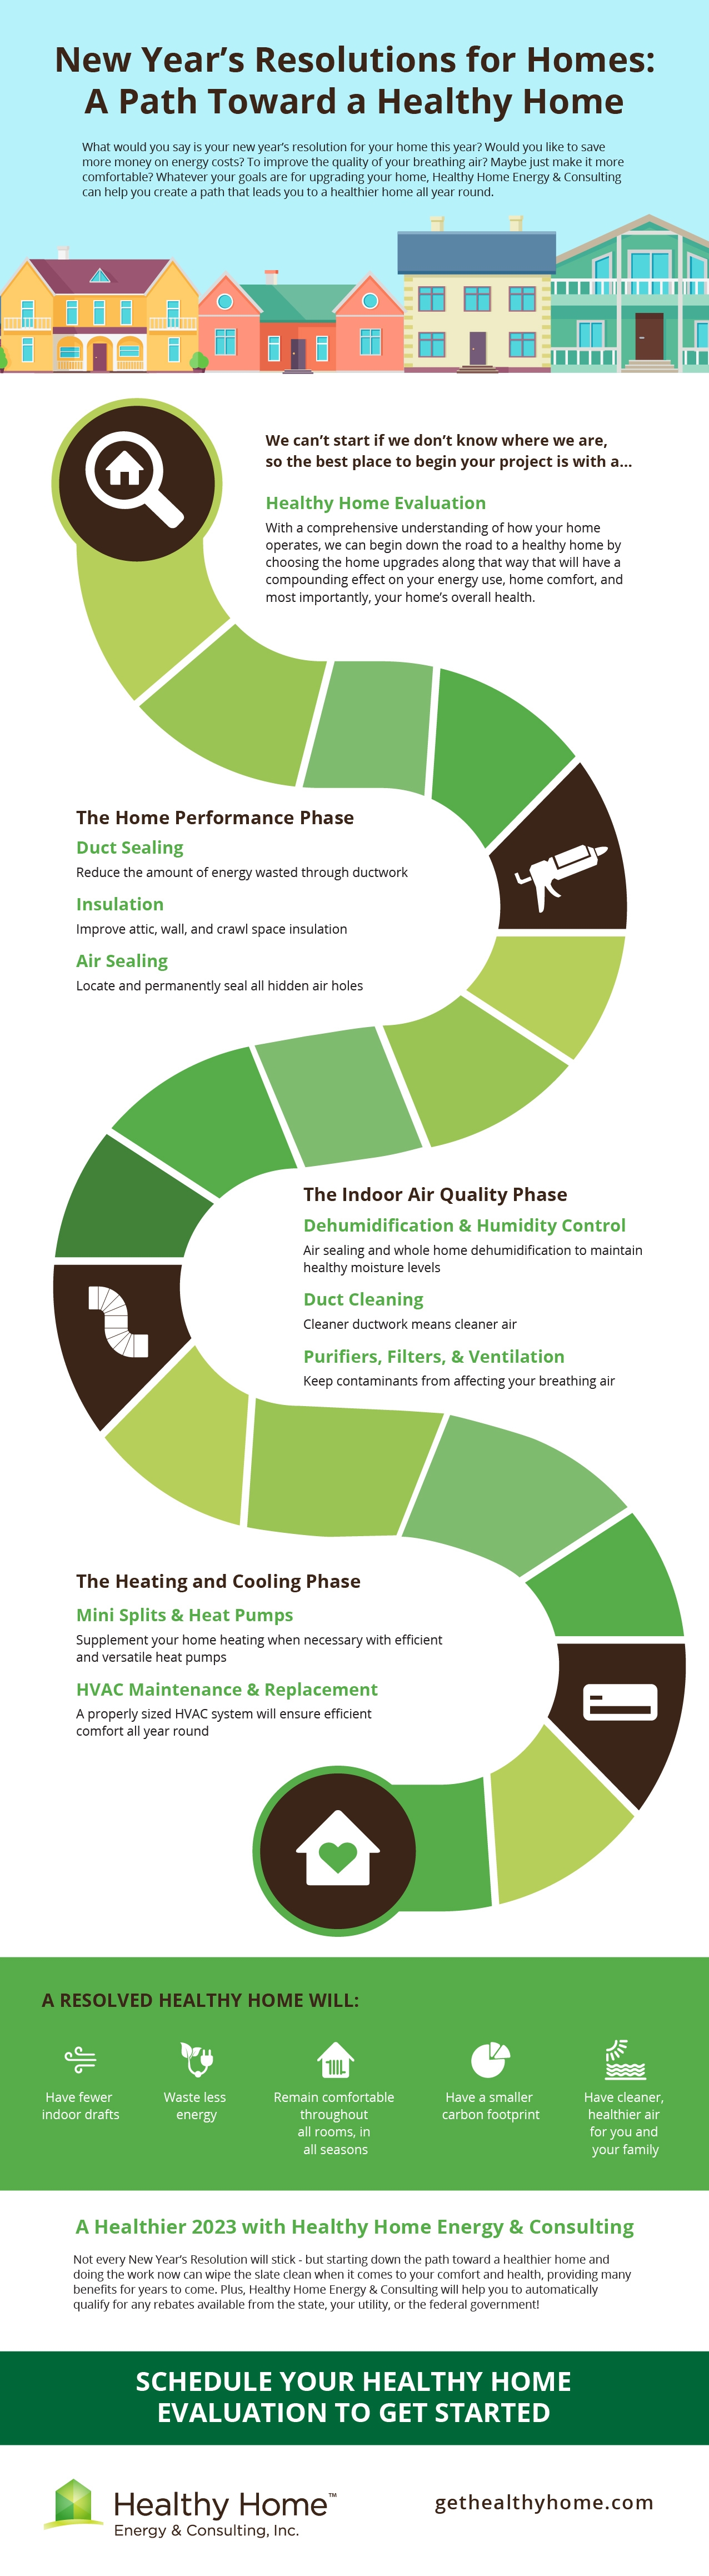 New Year’s Resolutions for Homes: A Path Toward a Healthy Home infographic 